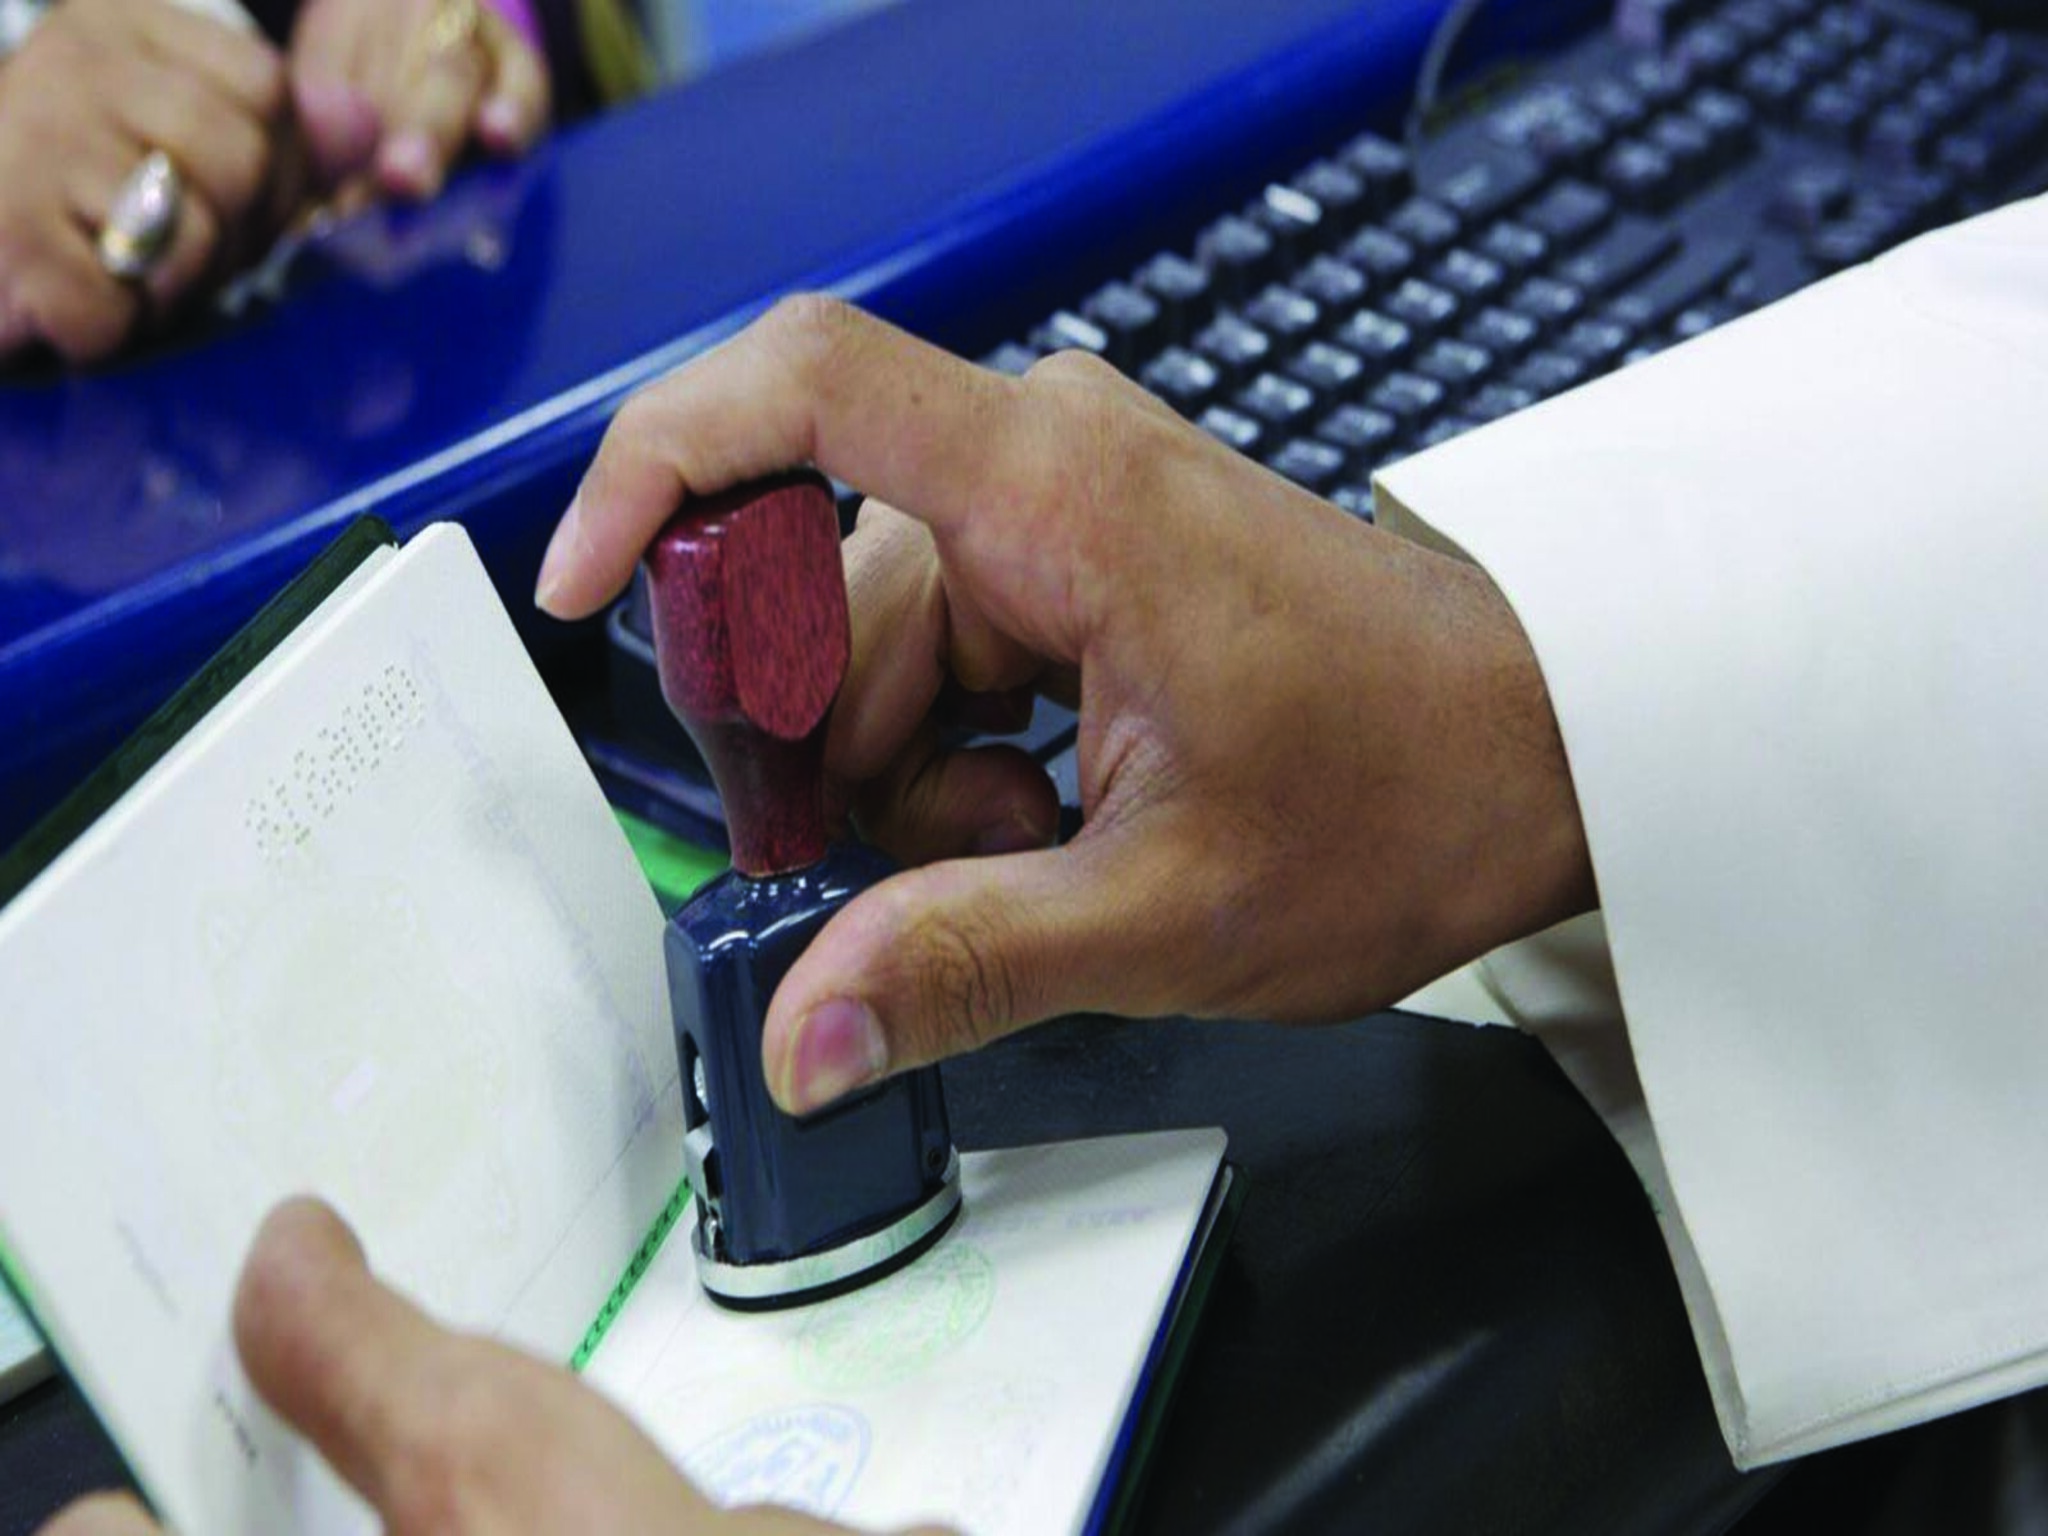 The UAE updates the requirements for the new free residency system